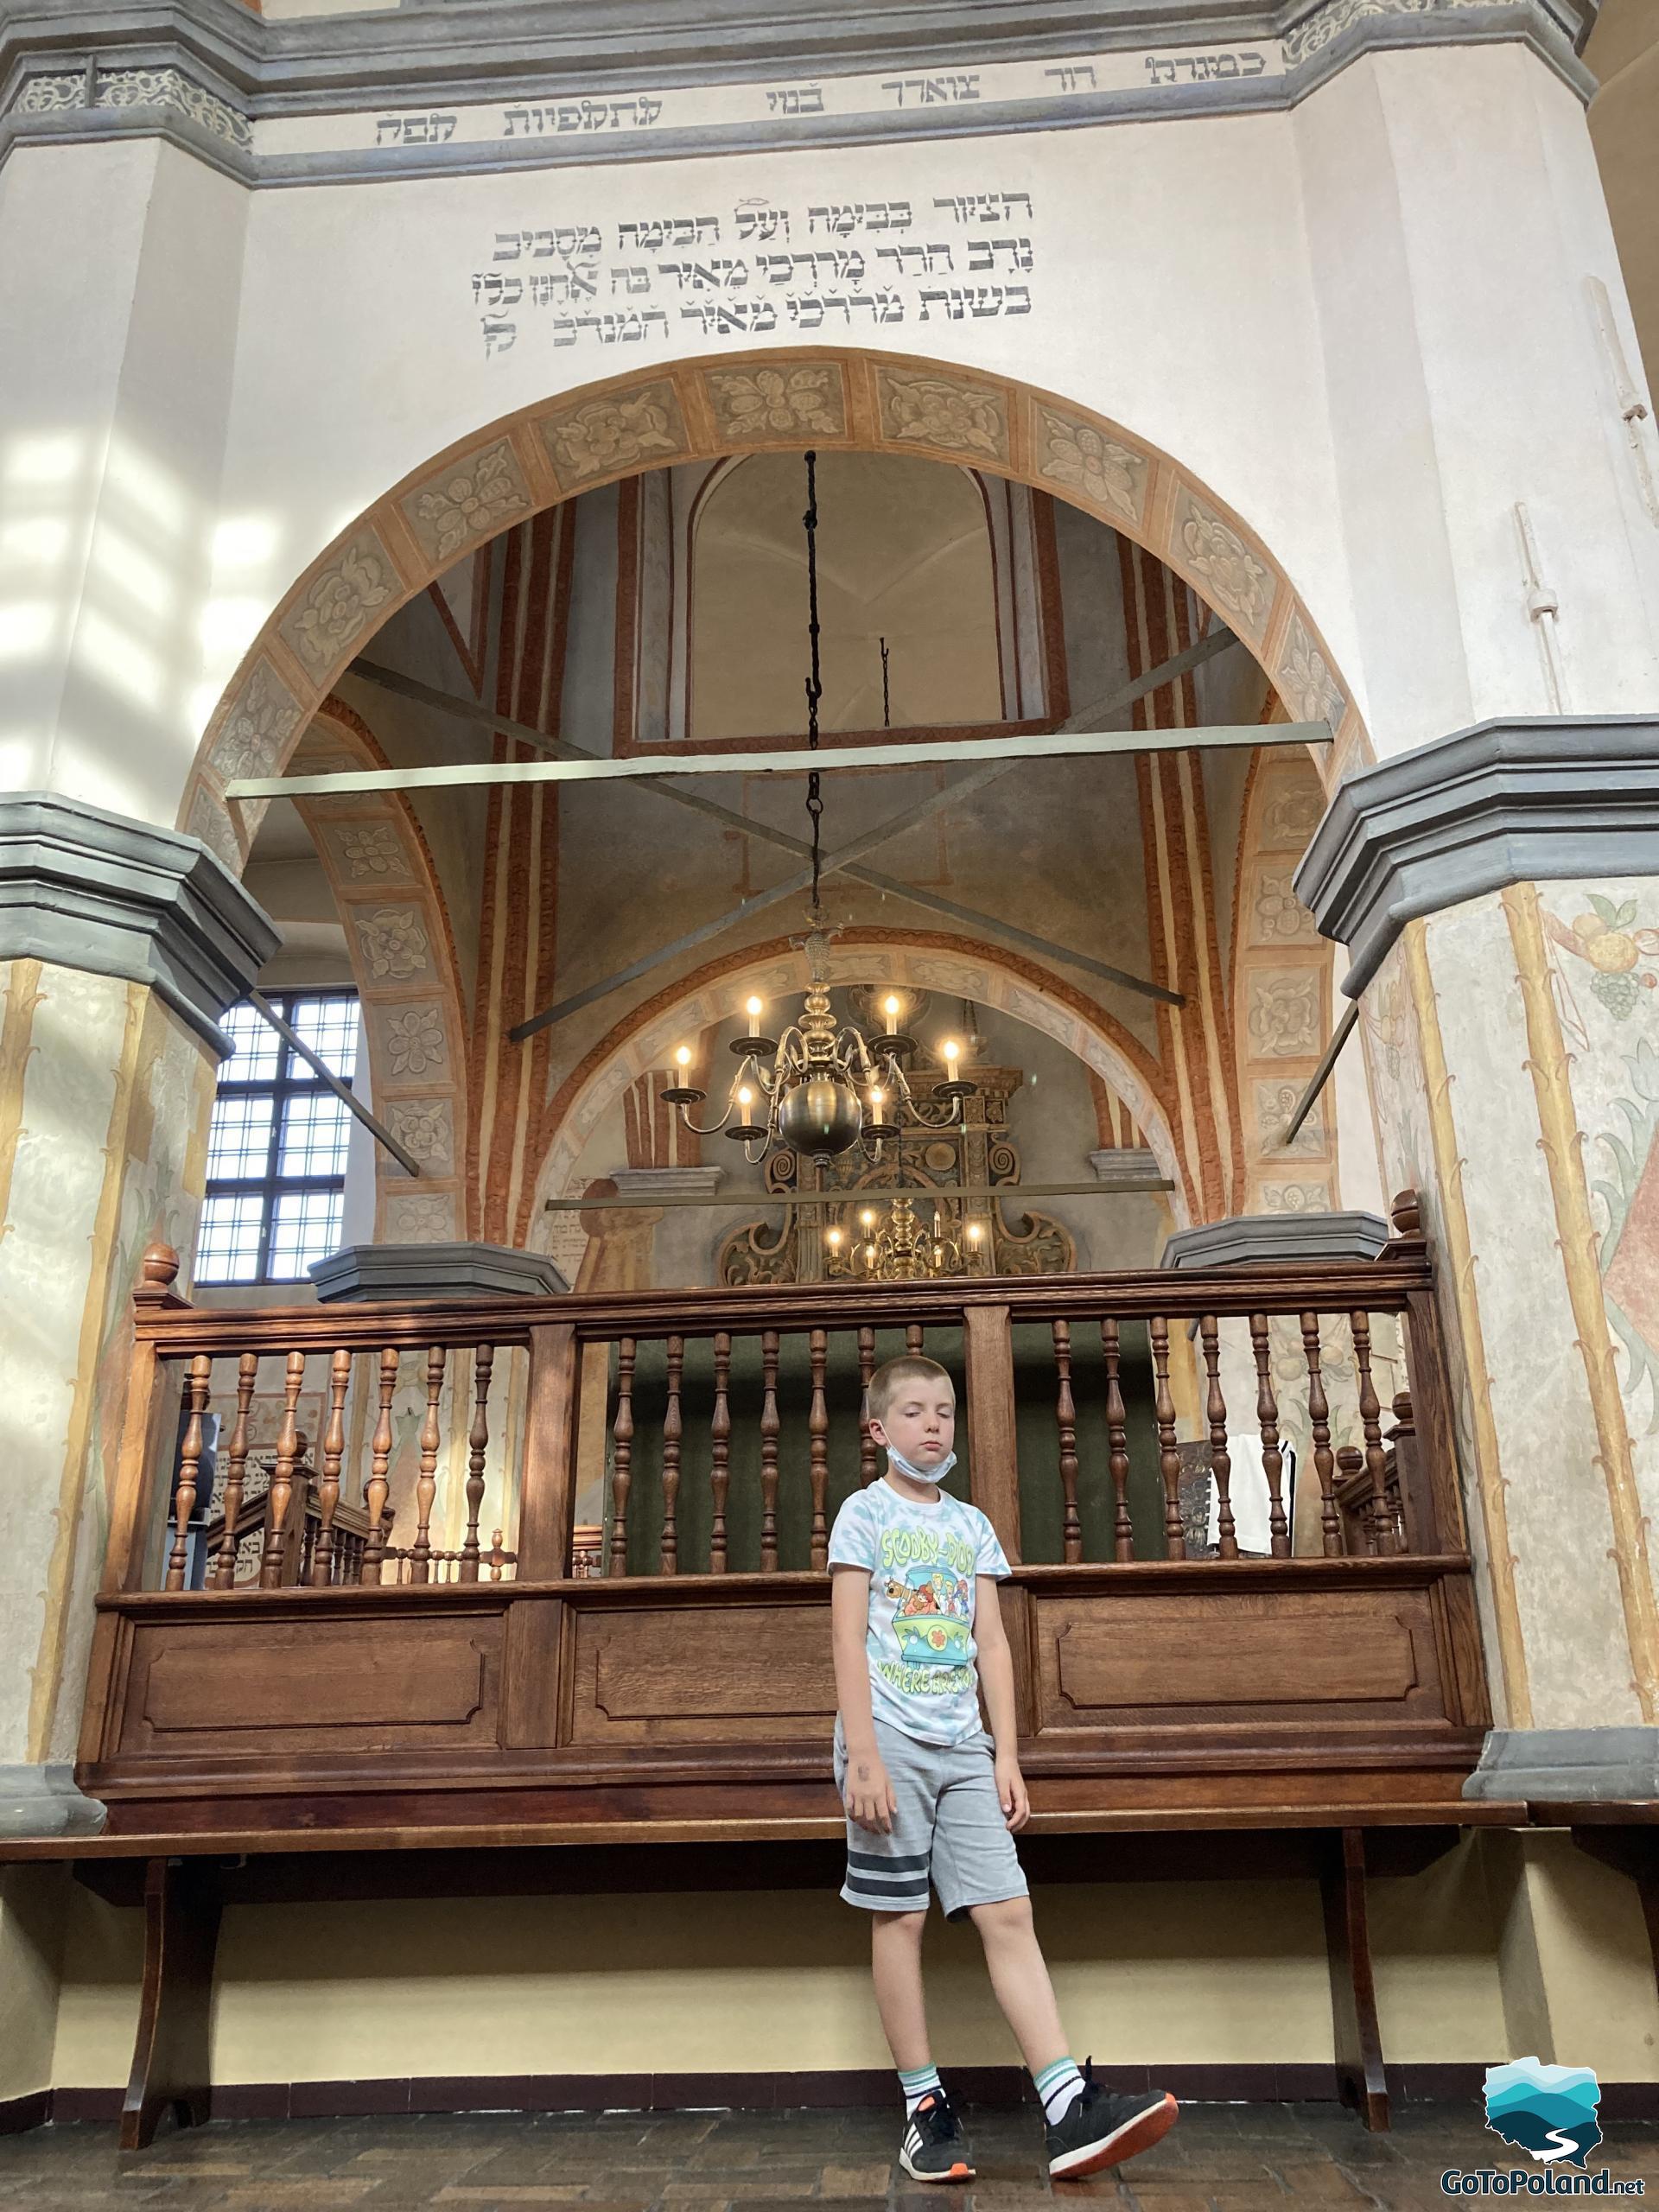 the boy is in the synagogue, he is standing by a wooden bench, there is an arch in the wall behind him, and an inscription in Yiddish above the arch